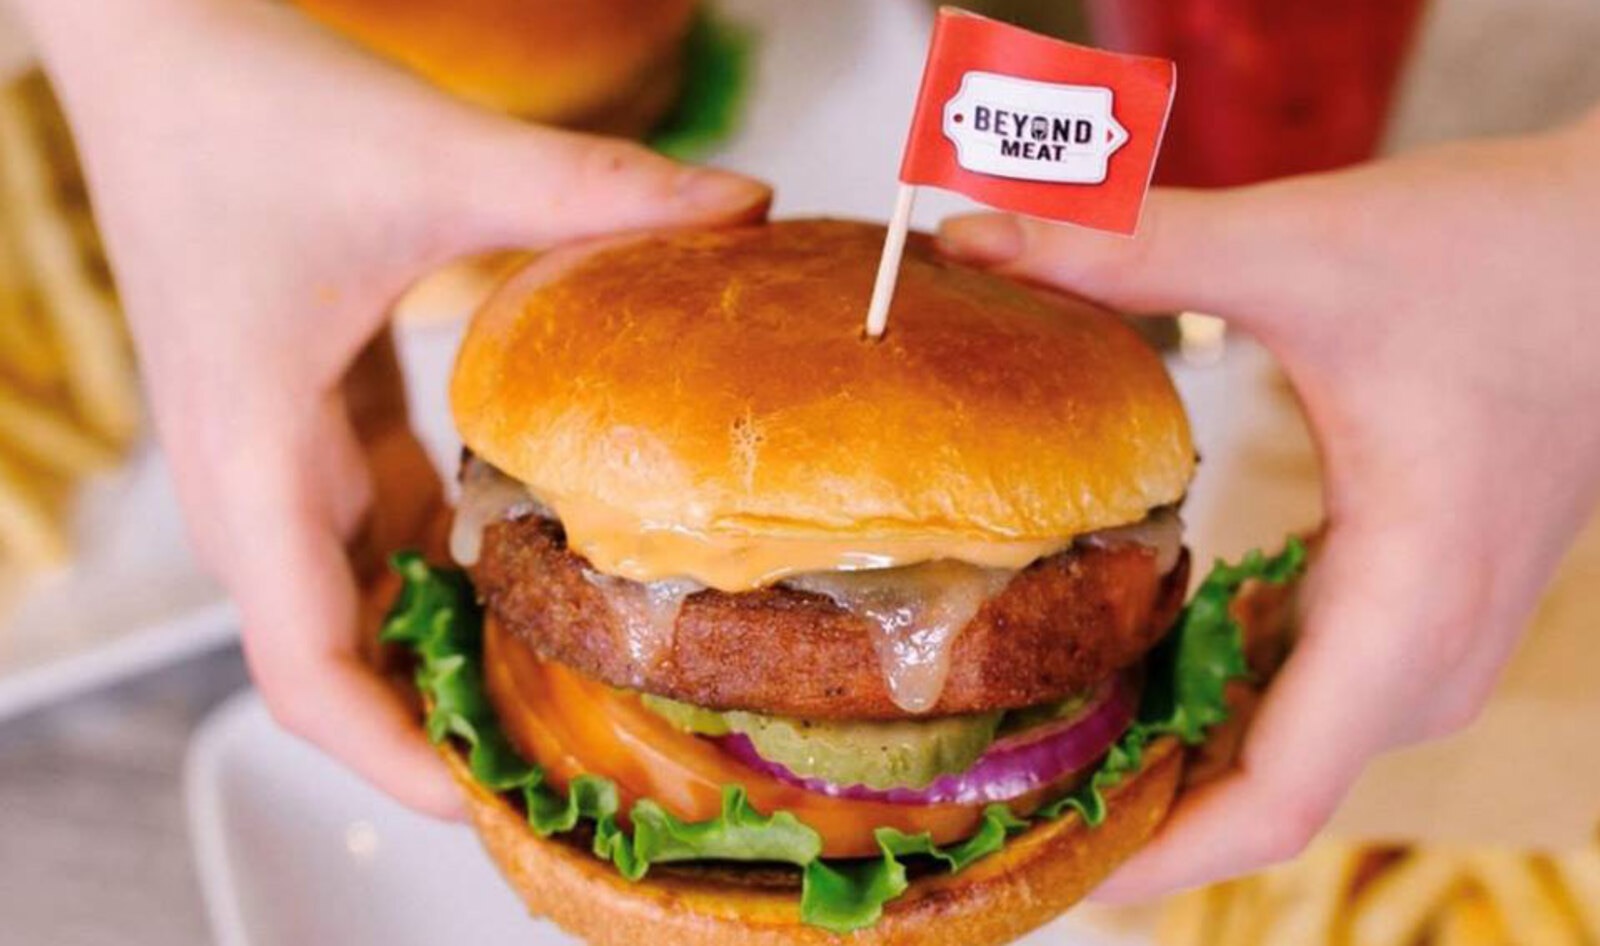 Beyond Meat to Donate More Than One Million Vegan Burgers to COVID-19 Frontline Workers